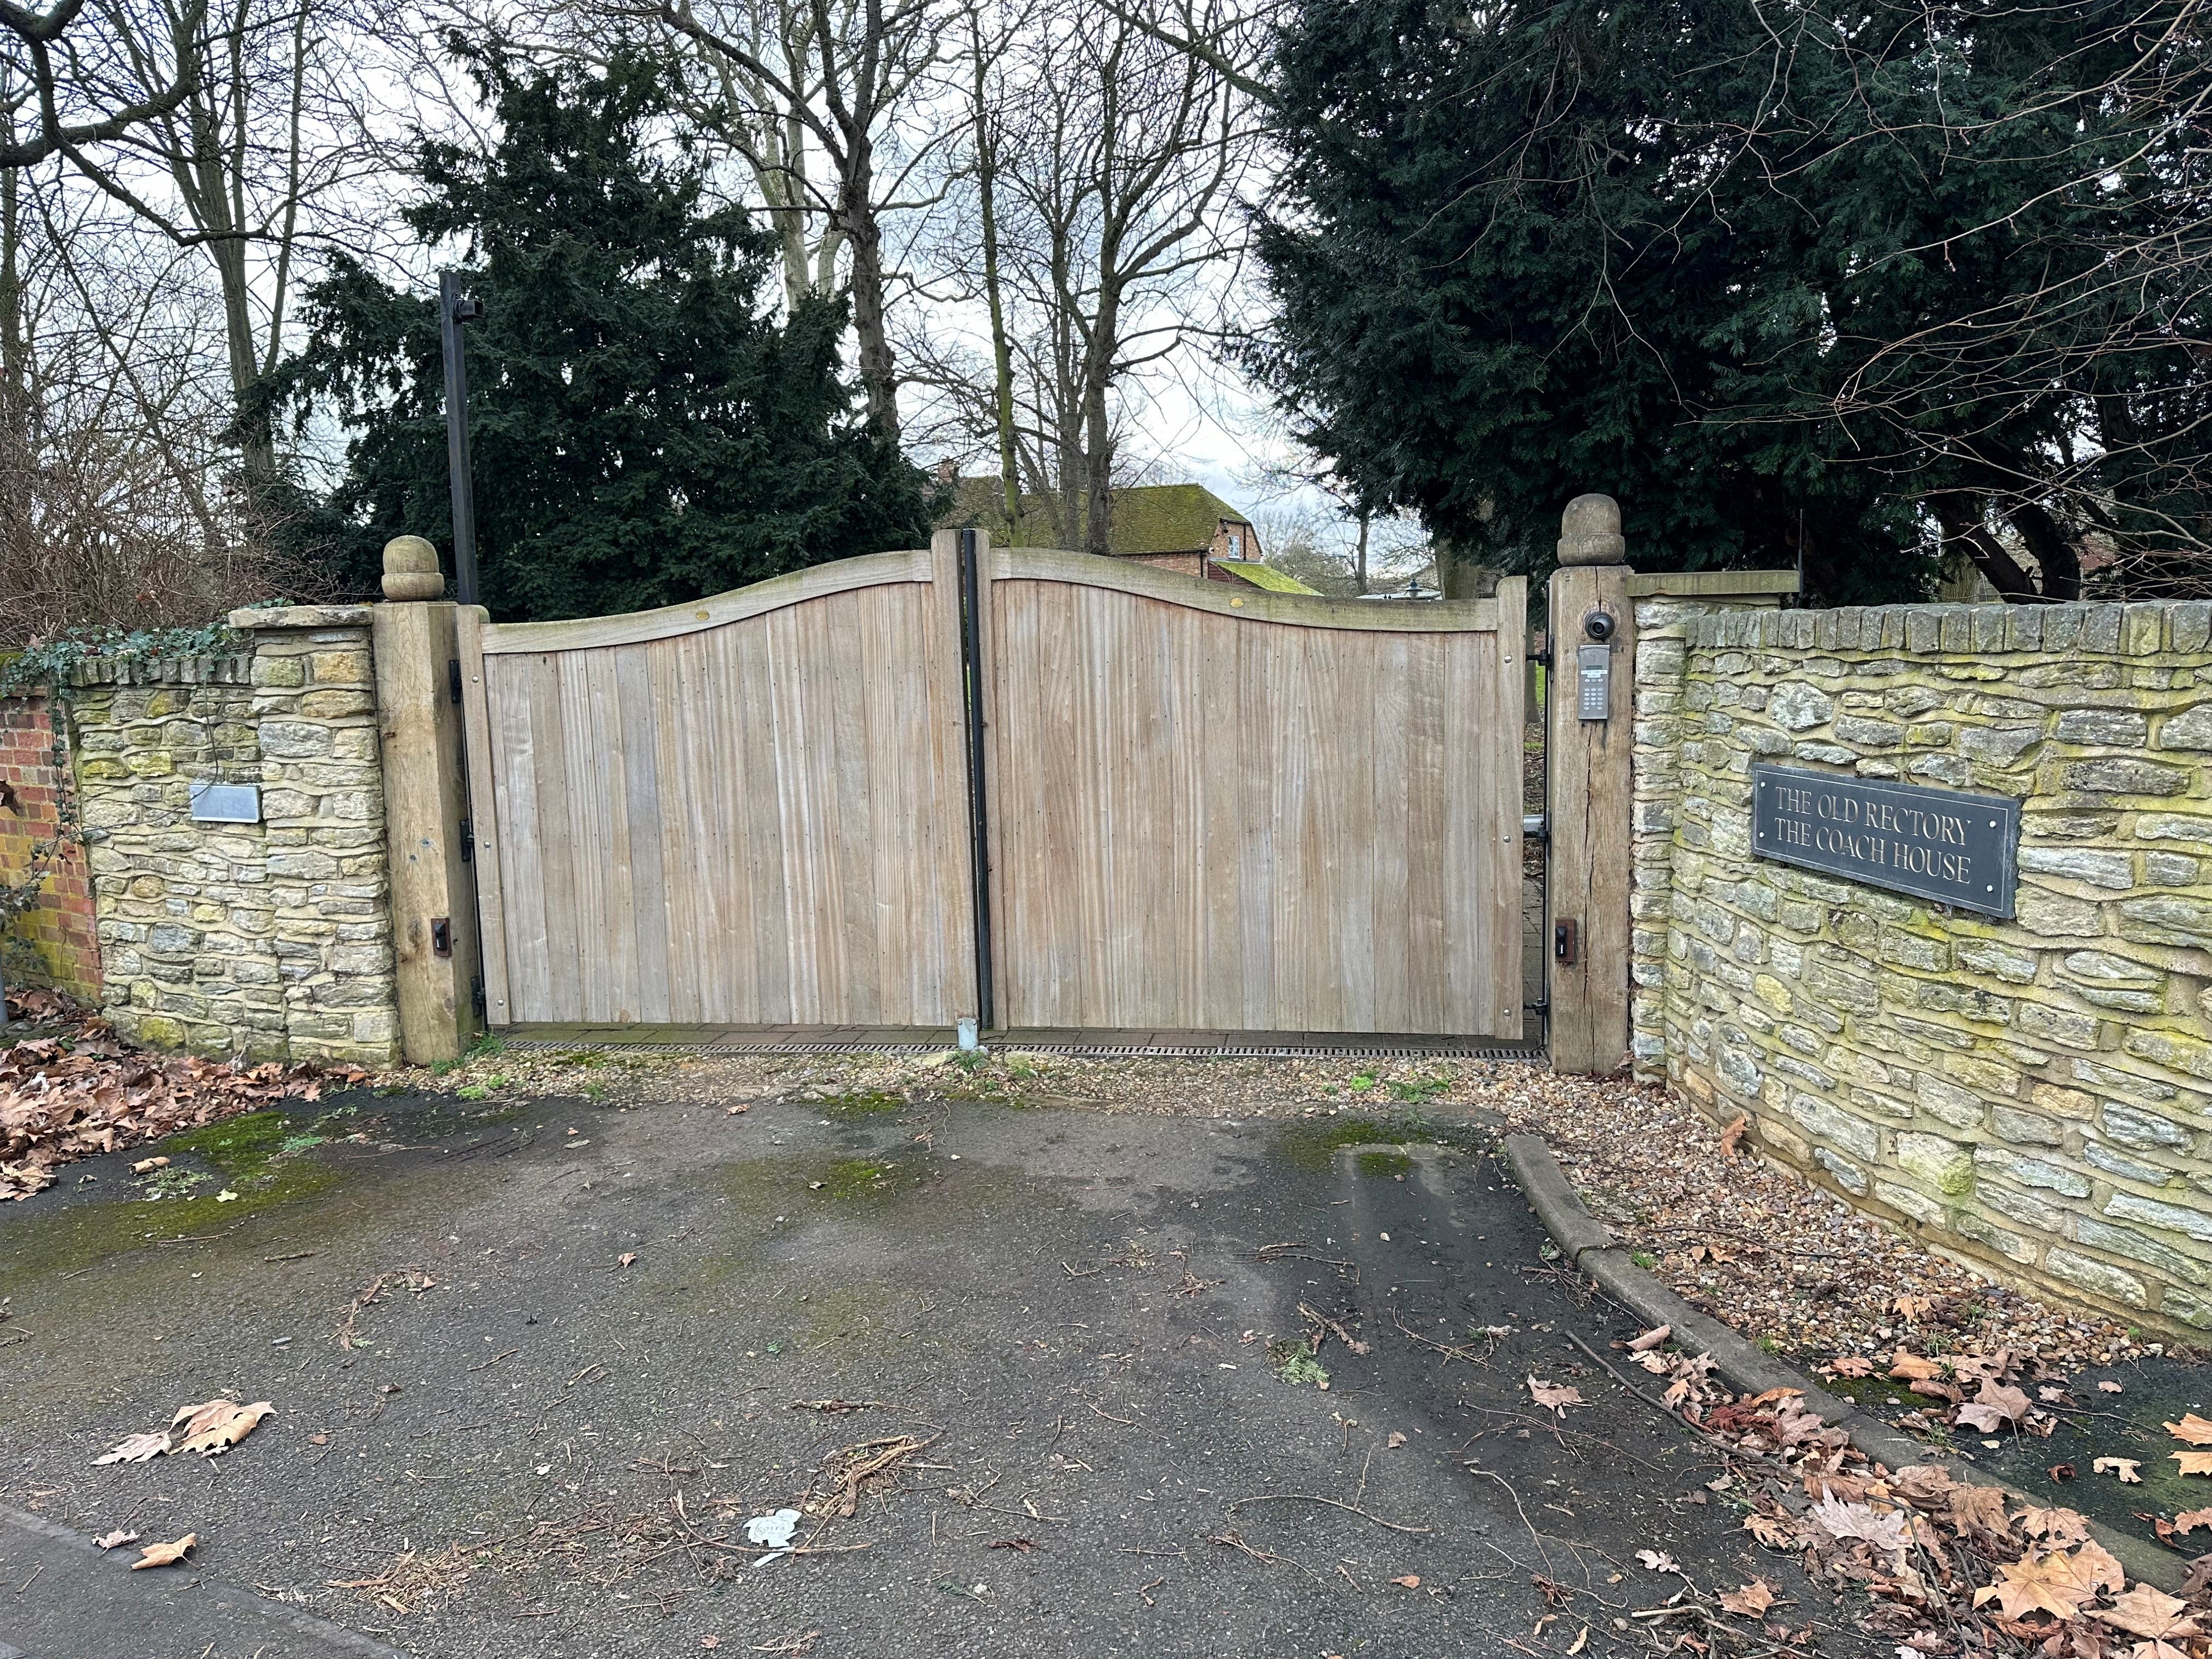 The gated entrance to The Old Rectory. Fencing and trees surround the boundary to the house and garden